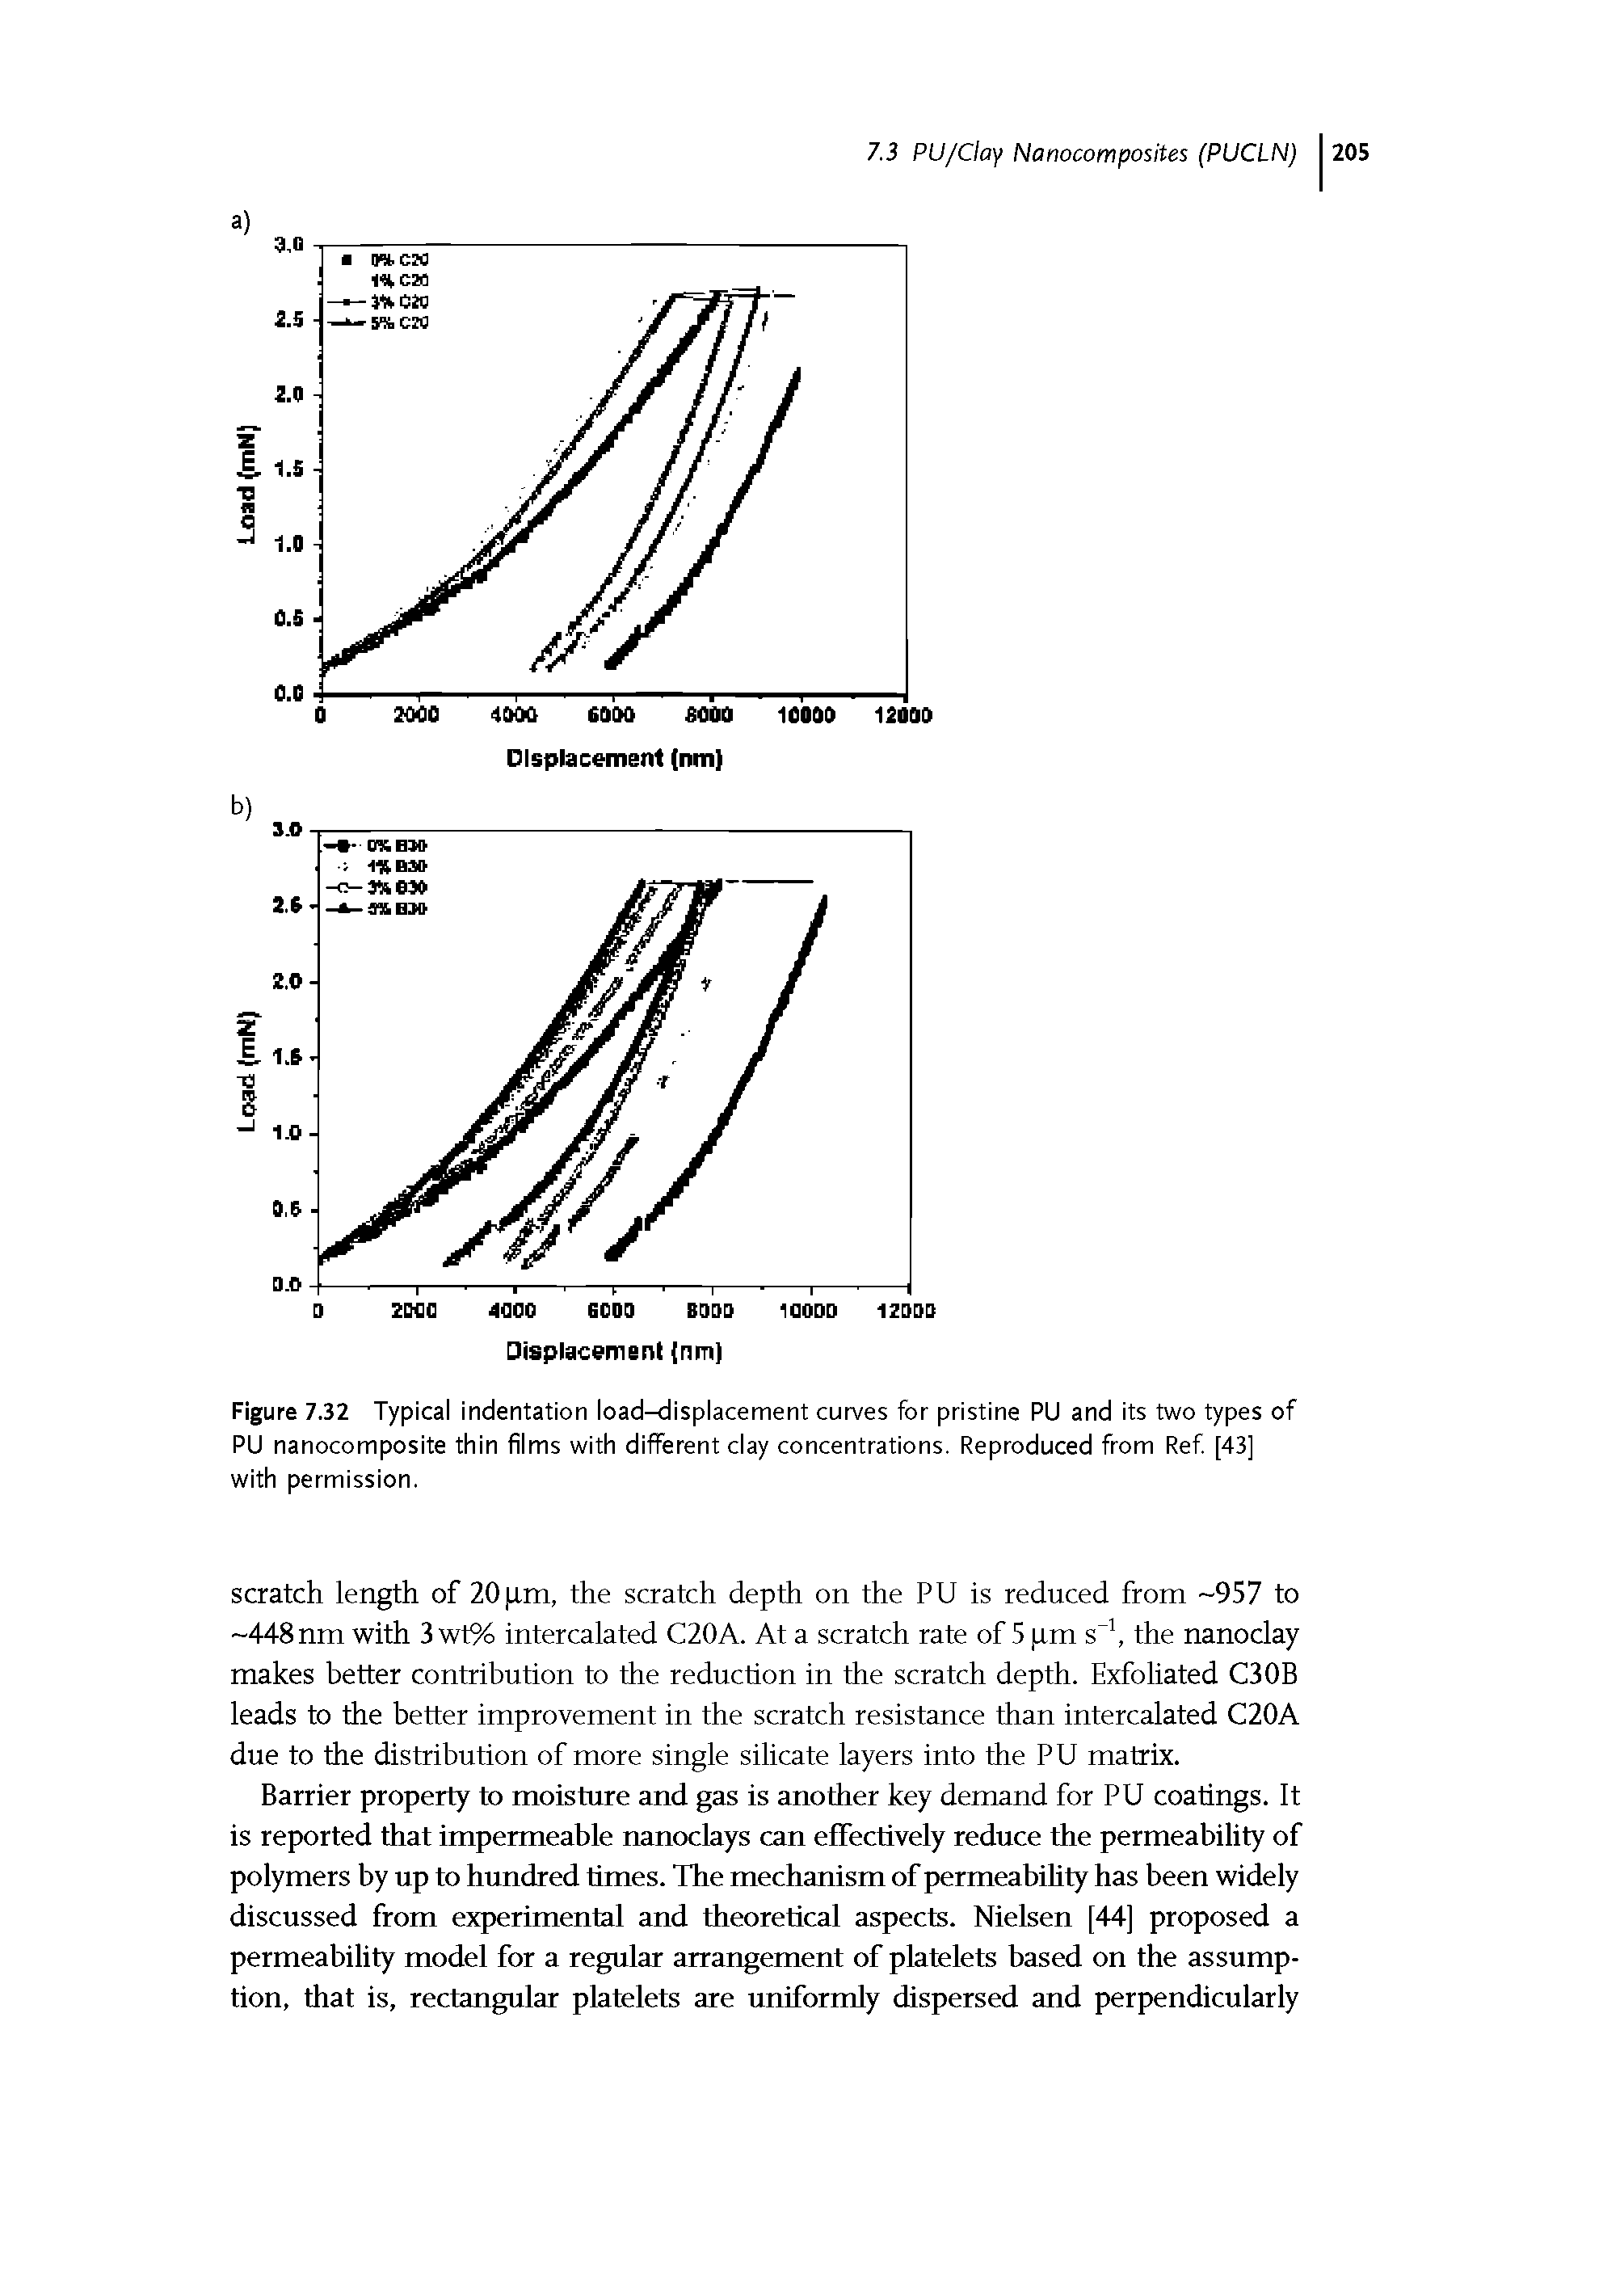 Figure 7.32 Typical indentation load-displacement curves for pristine PU and its two types of PU nanocomposite thin films with different clay concentrations. Reproduced from Ref. [43] with permission.